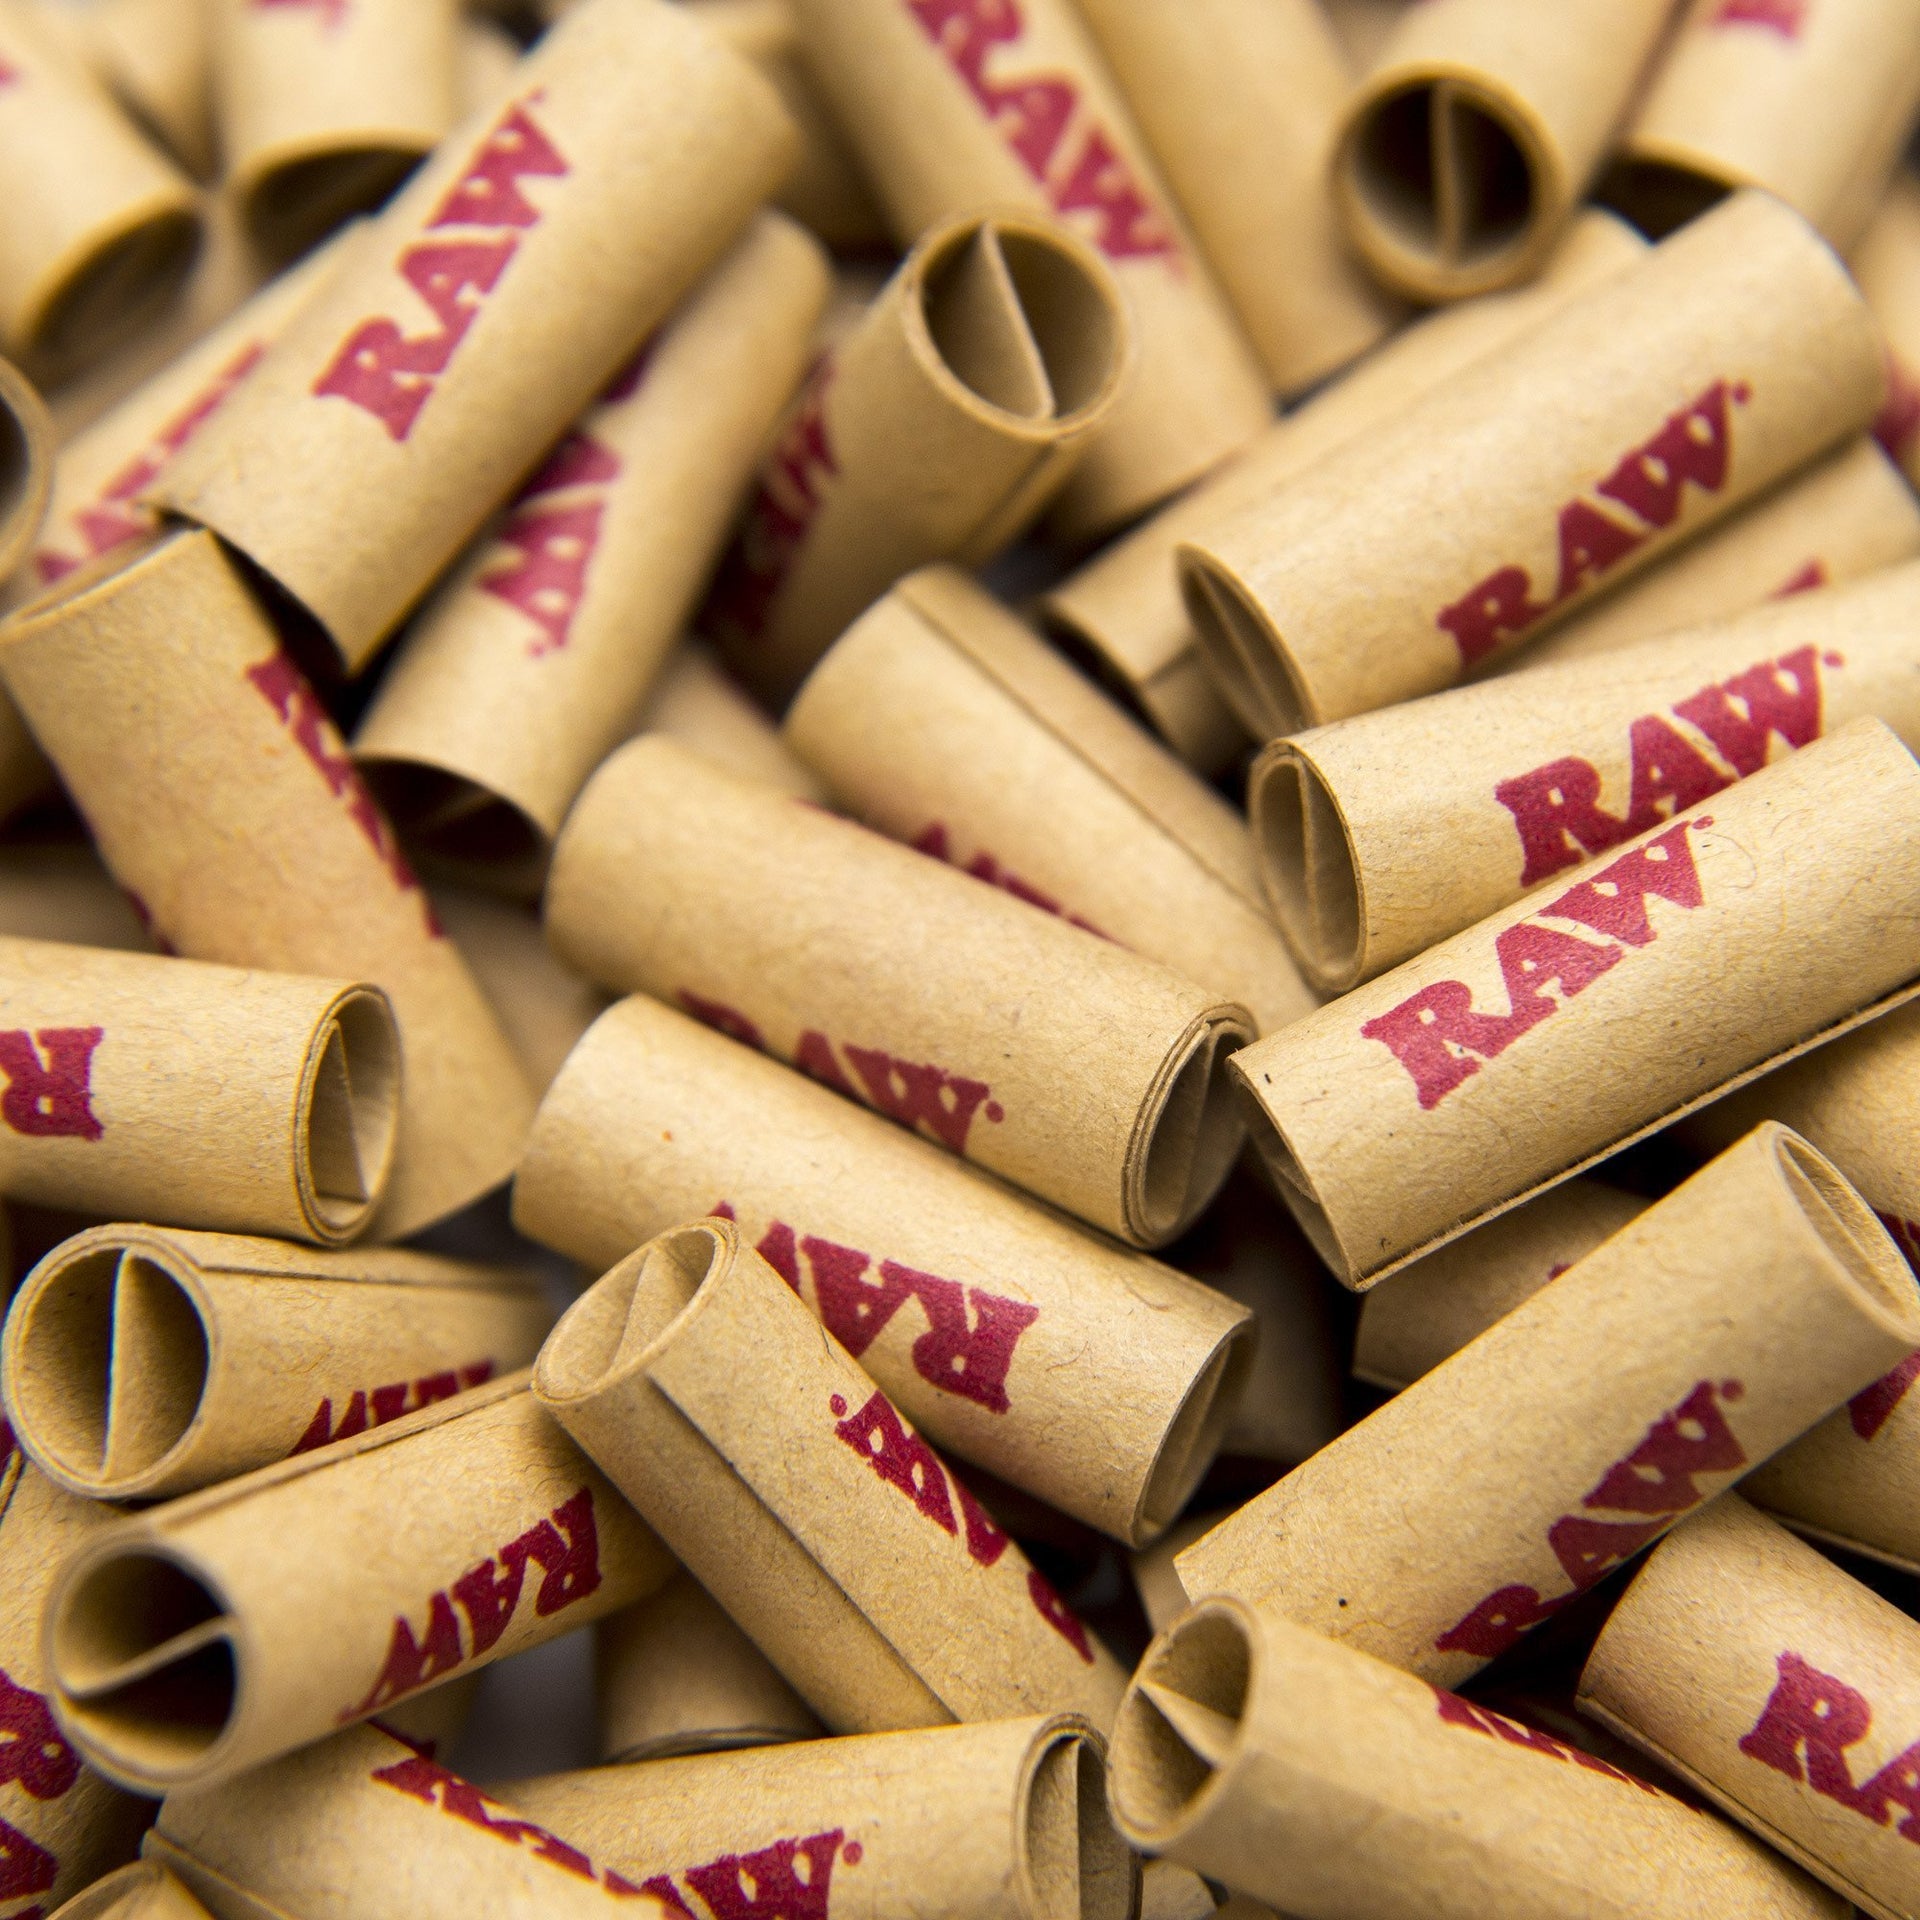 RAW Unbleached Roll-Up Tips 50-Pack / $ 0.99 at 420 Science